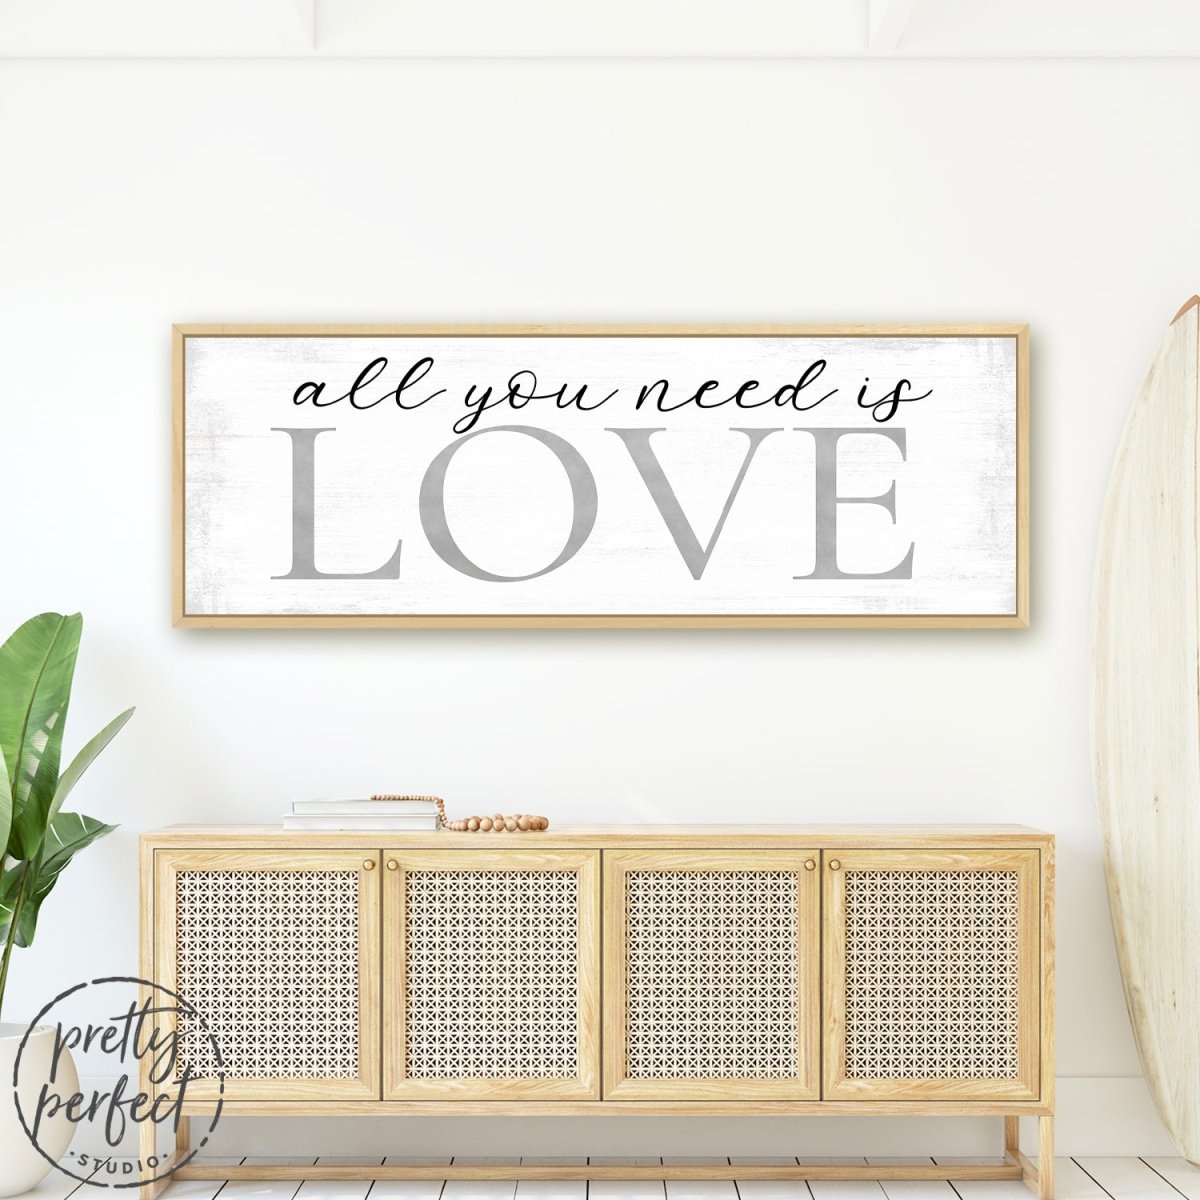 All You Need Is Love Canvas Wall Art Above Table In Living Room - Pretty Perfect Studio